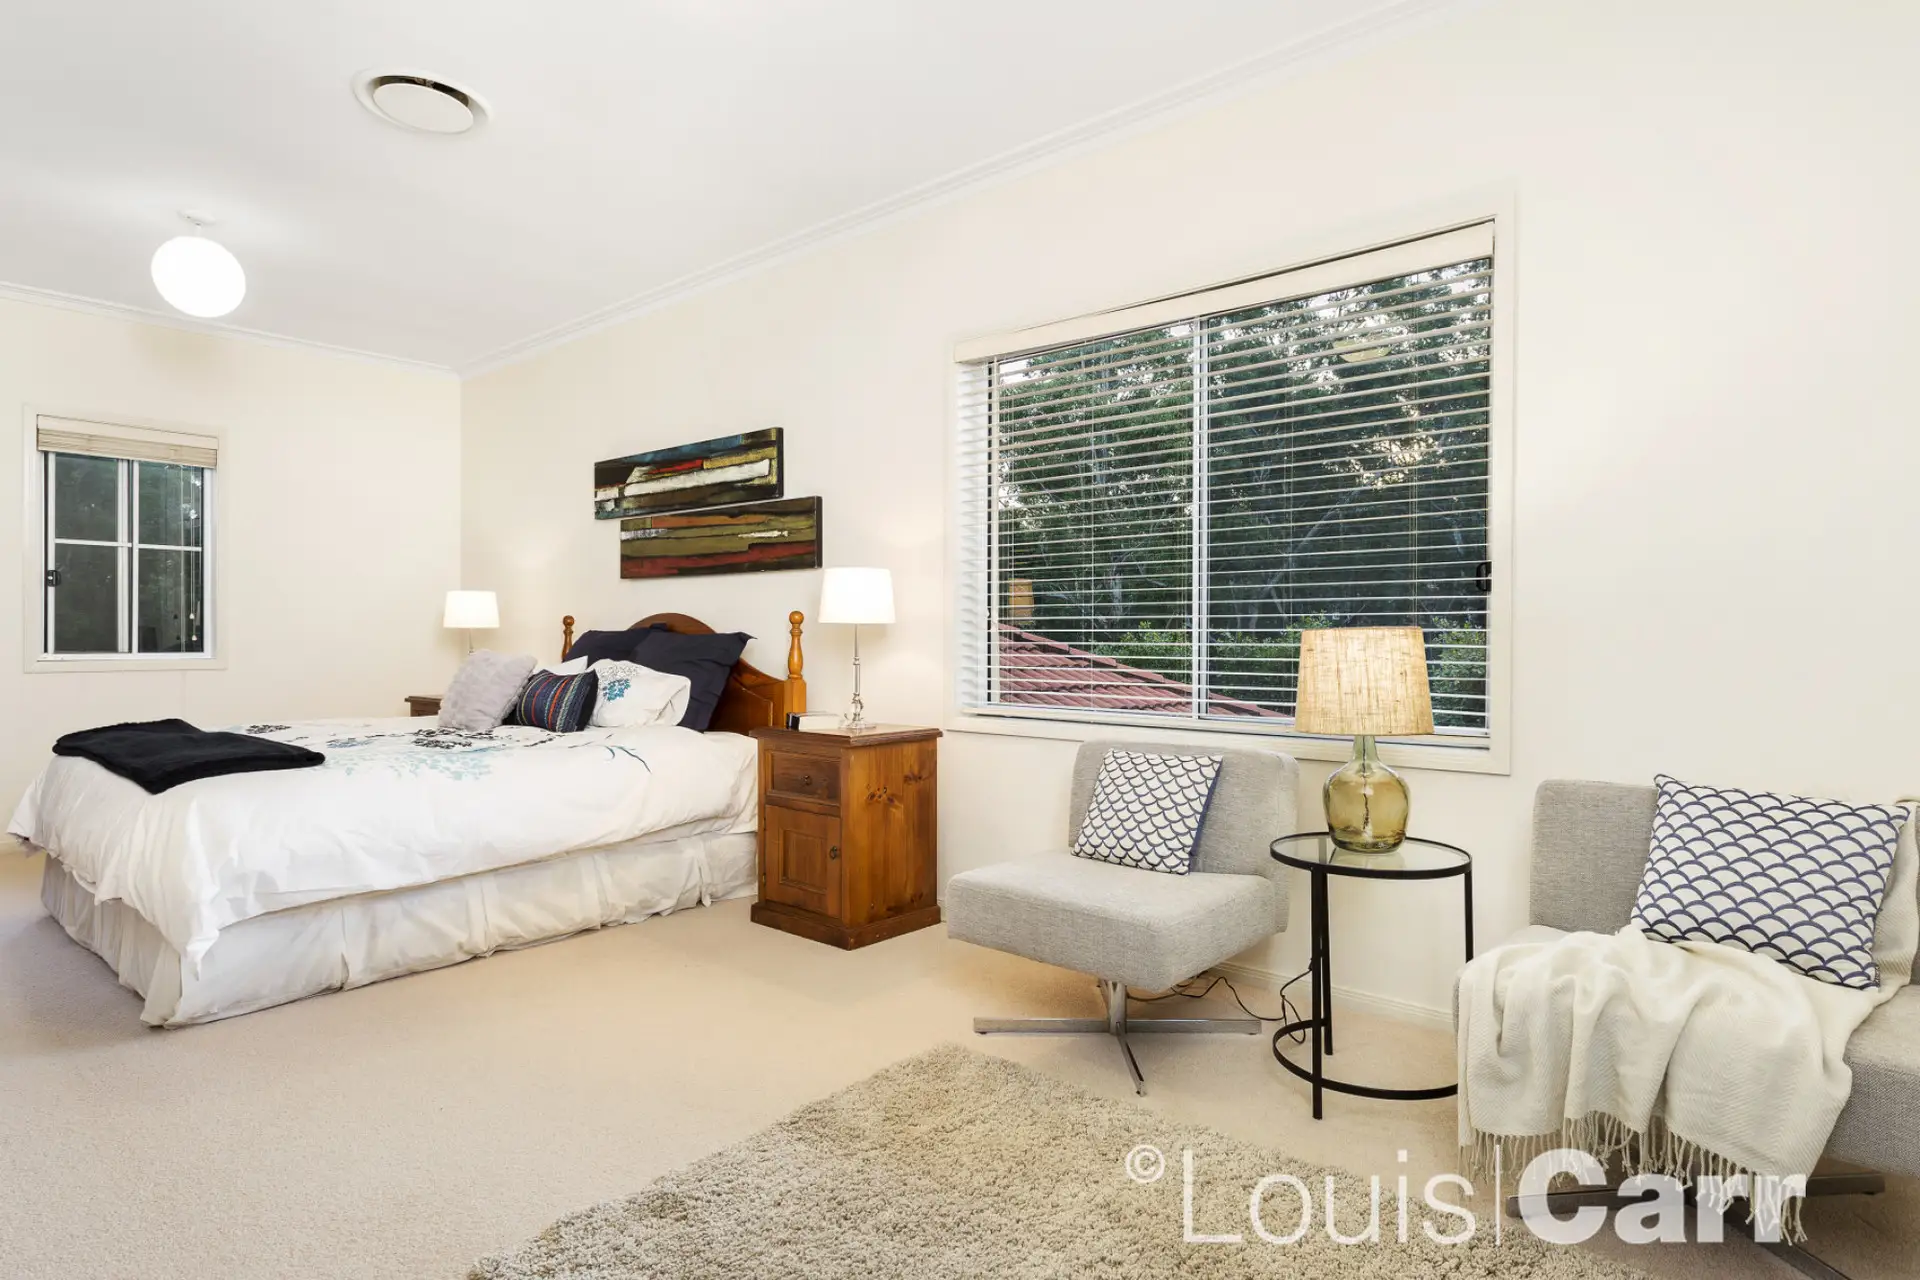 Photo #7: 15 Wollemi Place, Dural - Sold by Louis Carr Real Estate